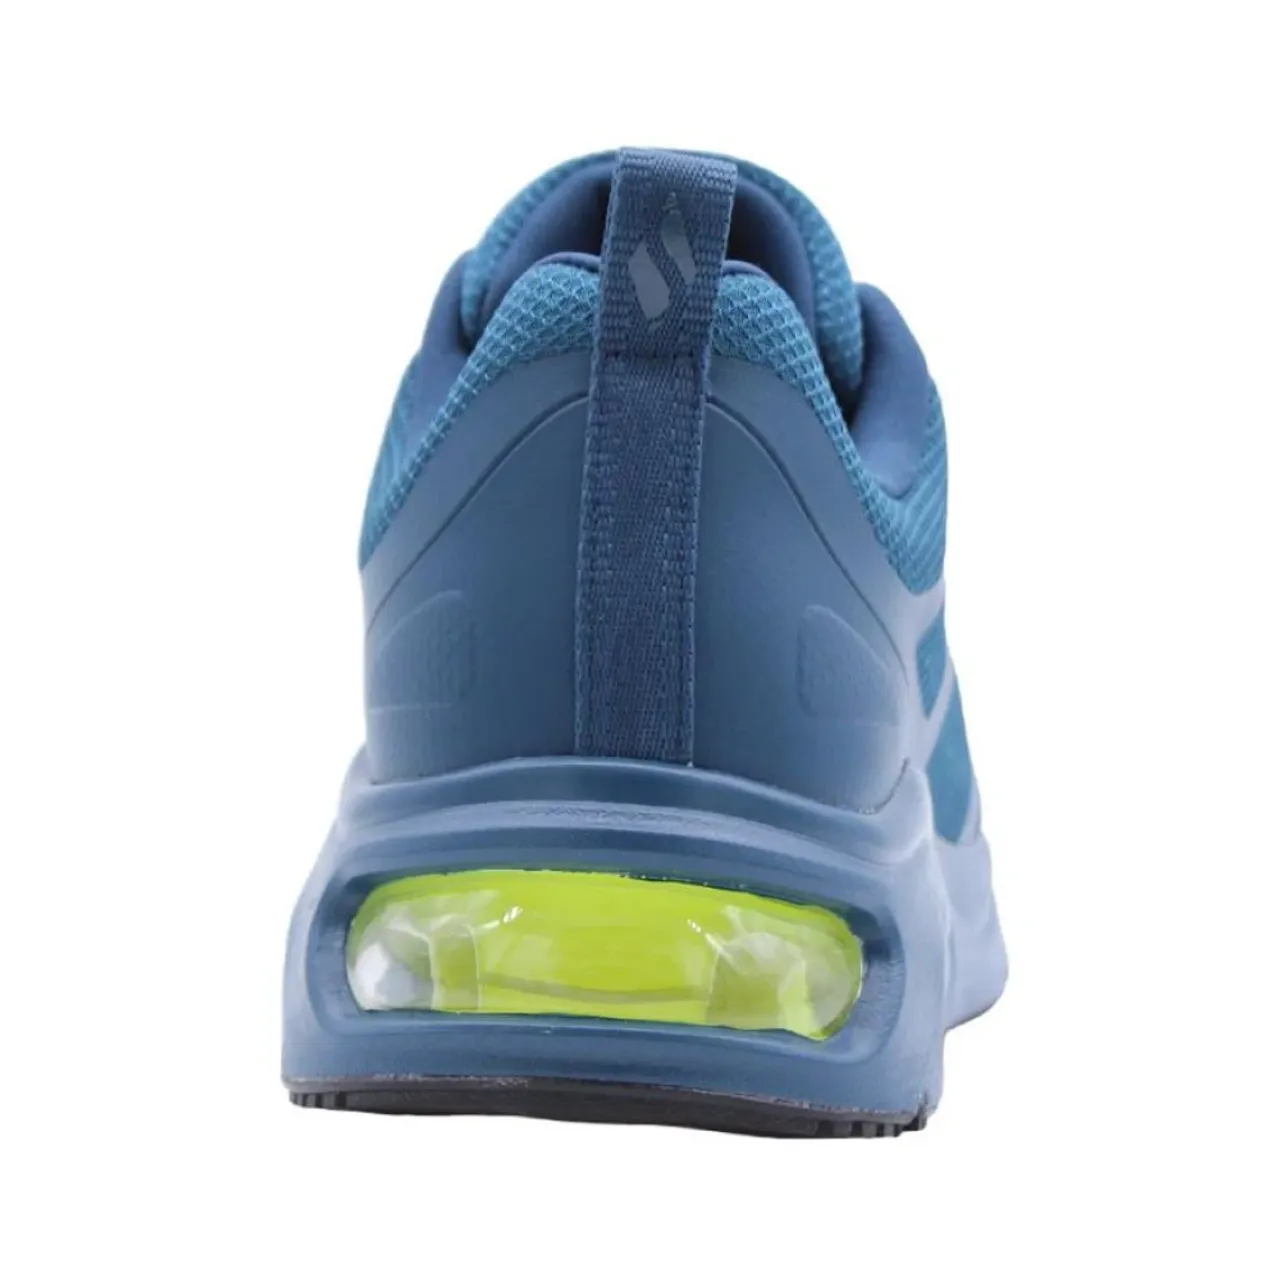 Skechers , Running Shoes ,Blue male, Sizes: